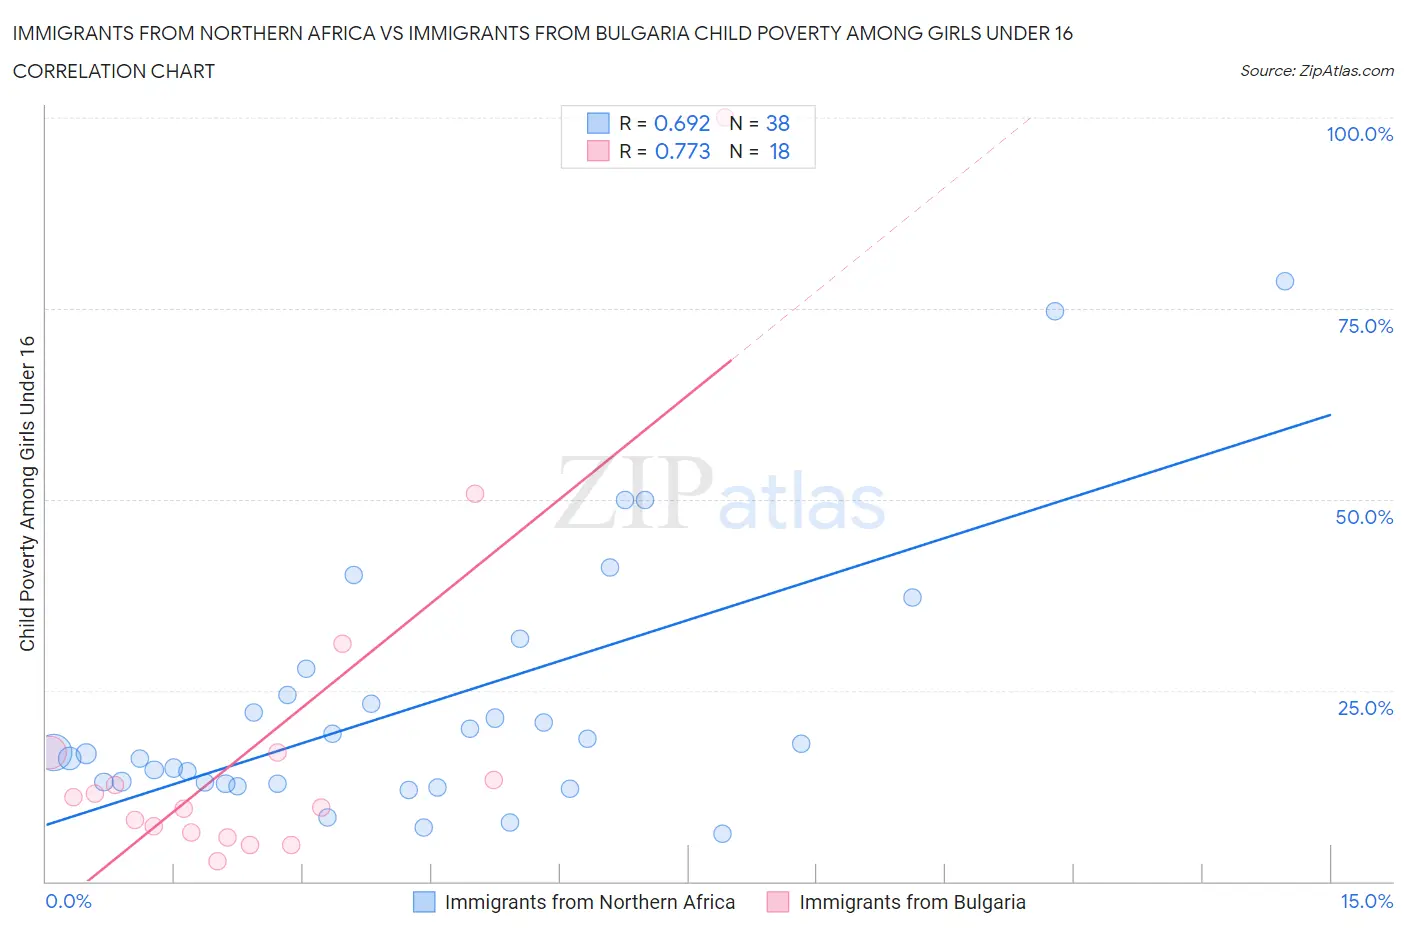 Immigrants from Northern Africa vs Immigrants from Bulgaria Child Poverty Among Girls Under 16